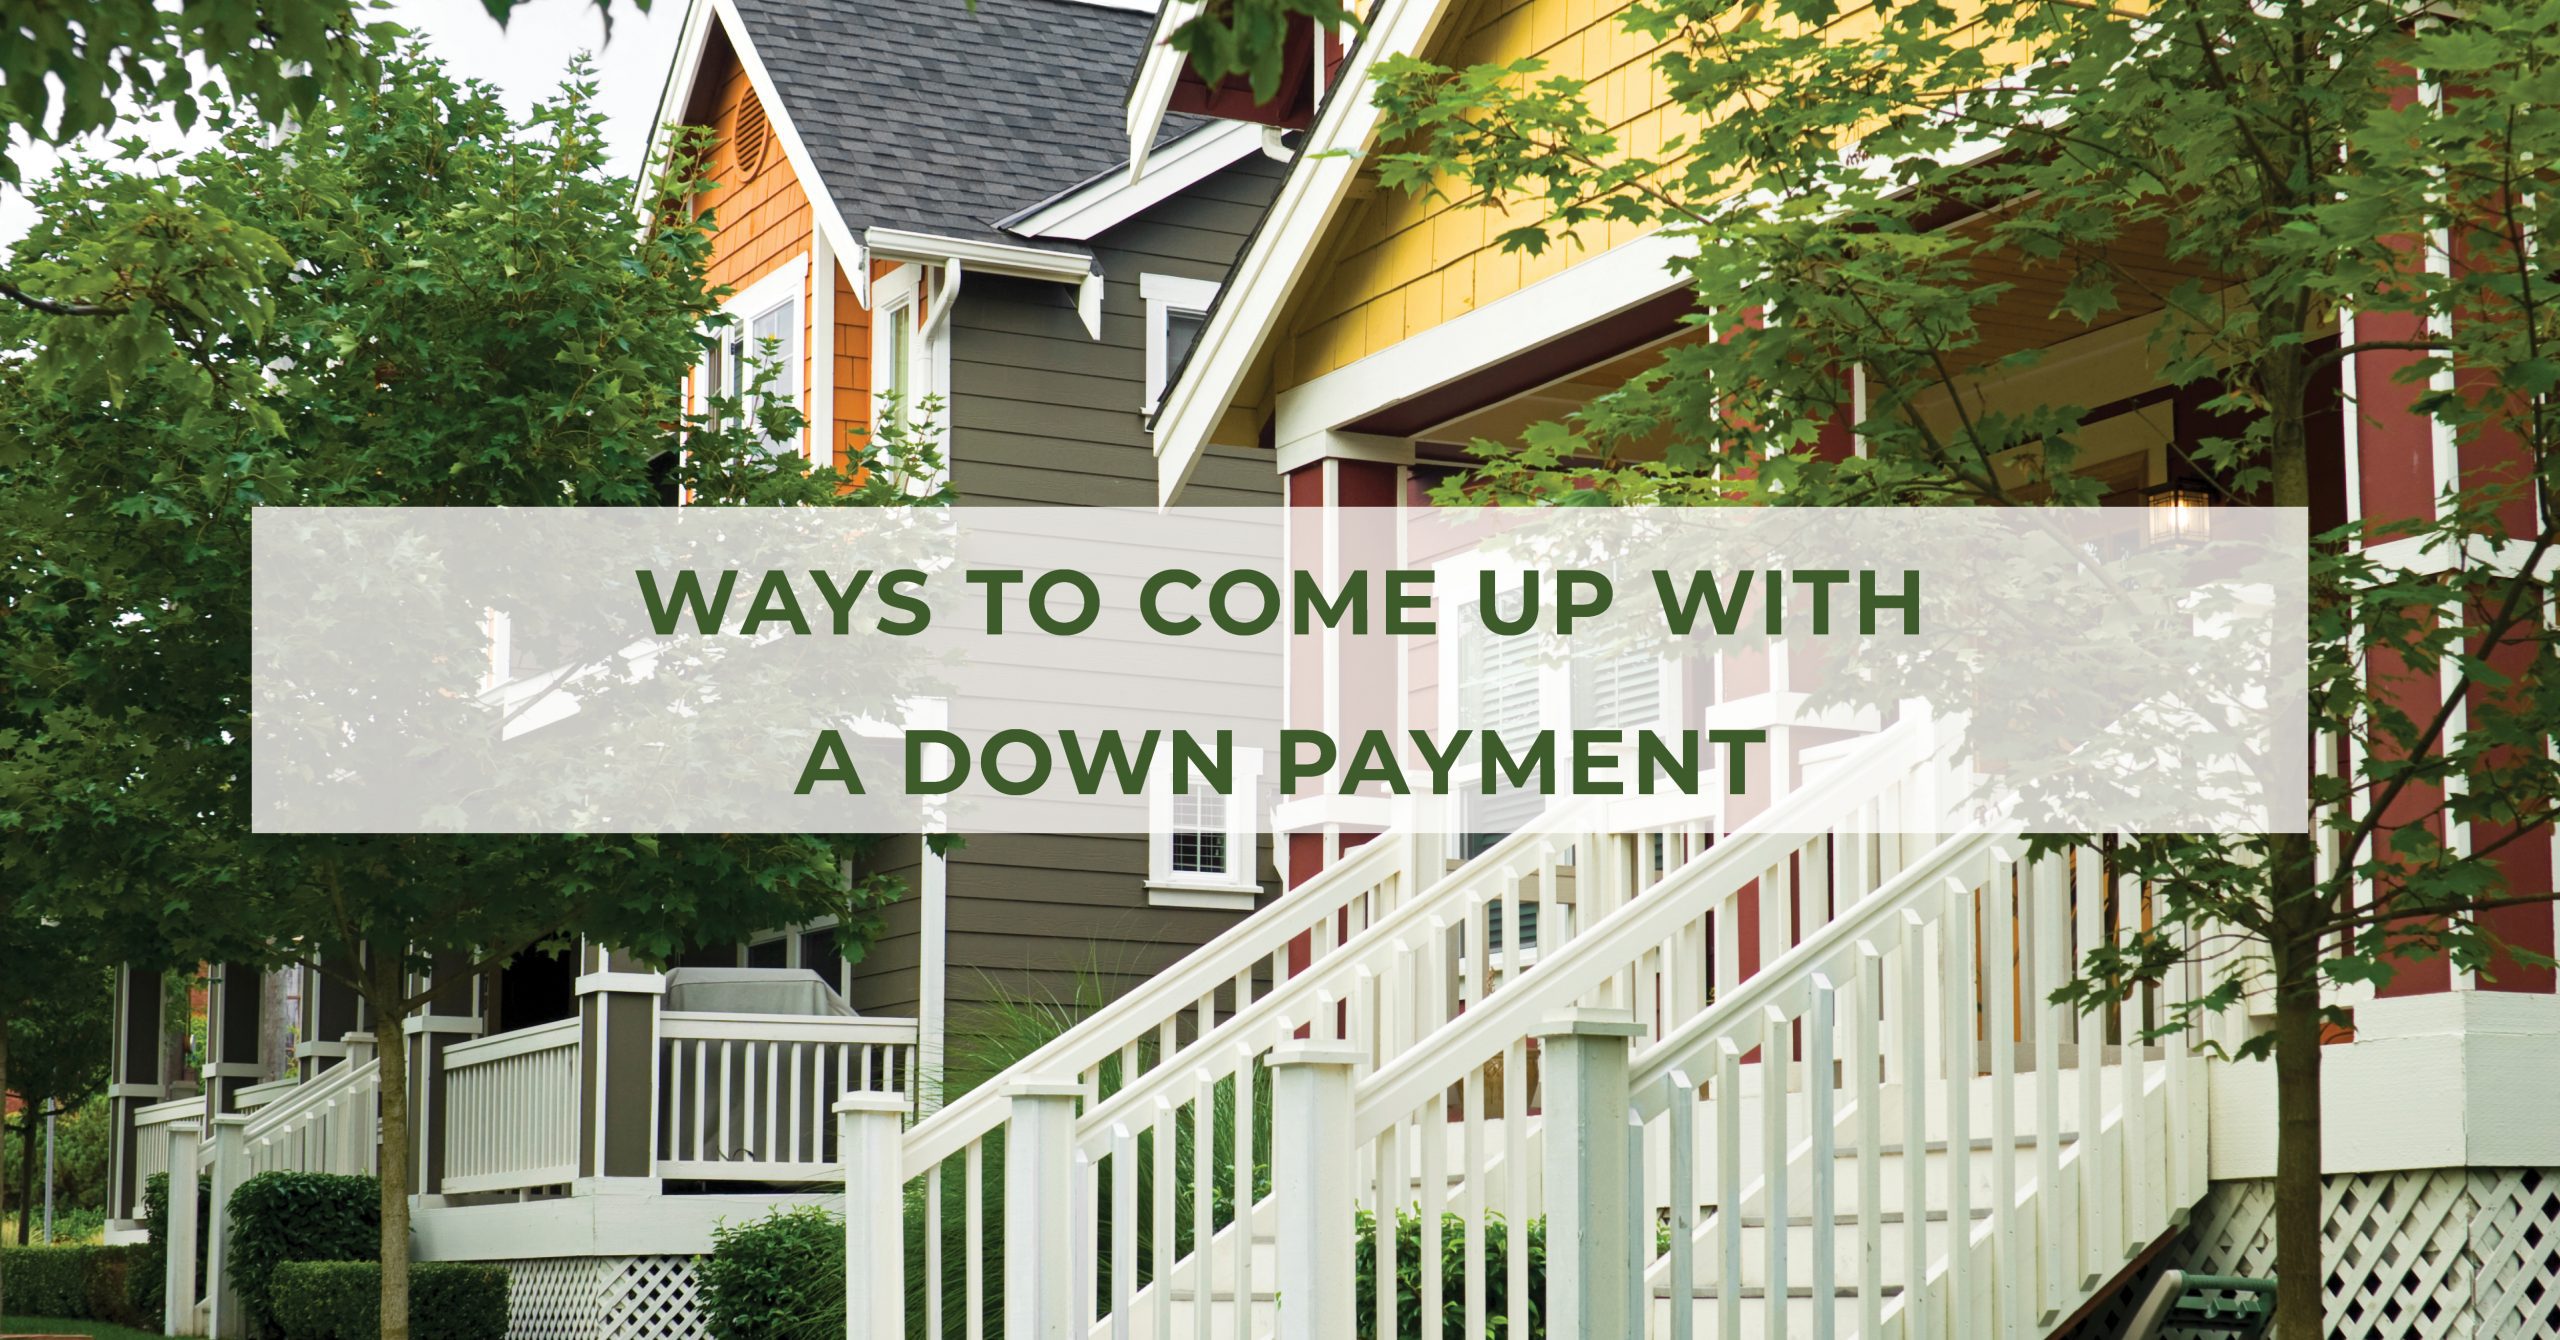 Ways to Come Up with a Down Payment